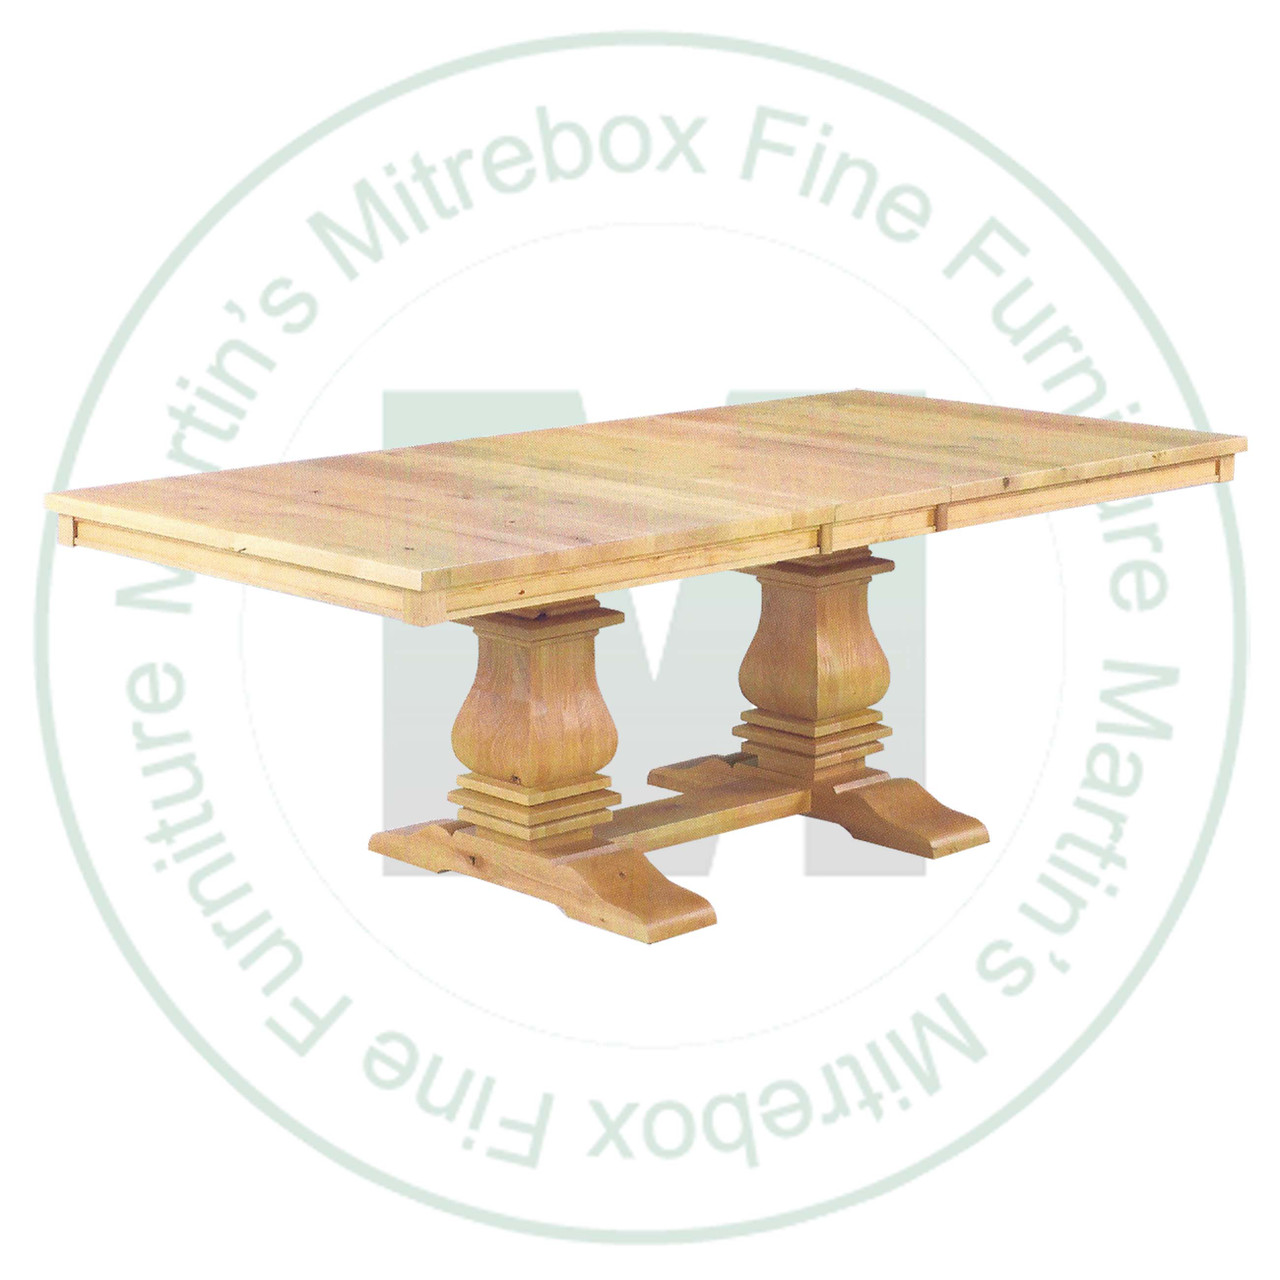 Maple Mediterranean Double Pedestal Table 48''D x 84''W x 30''H With 2 - 12'' Leaves. Table Has 1.25'' Thick Top